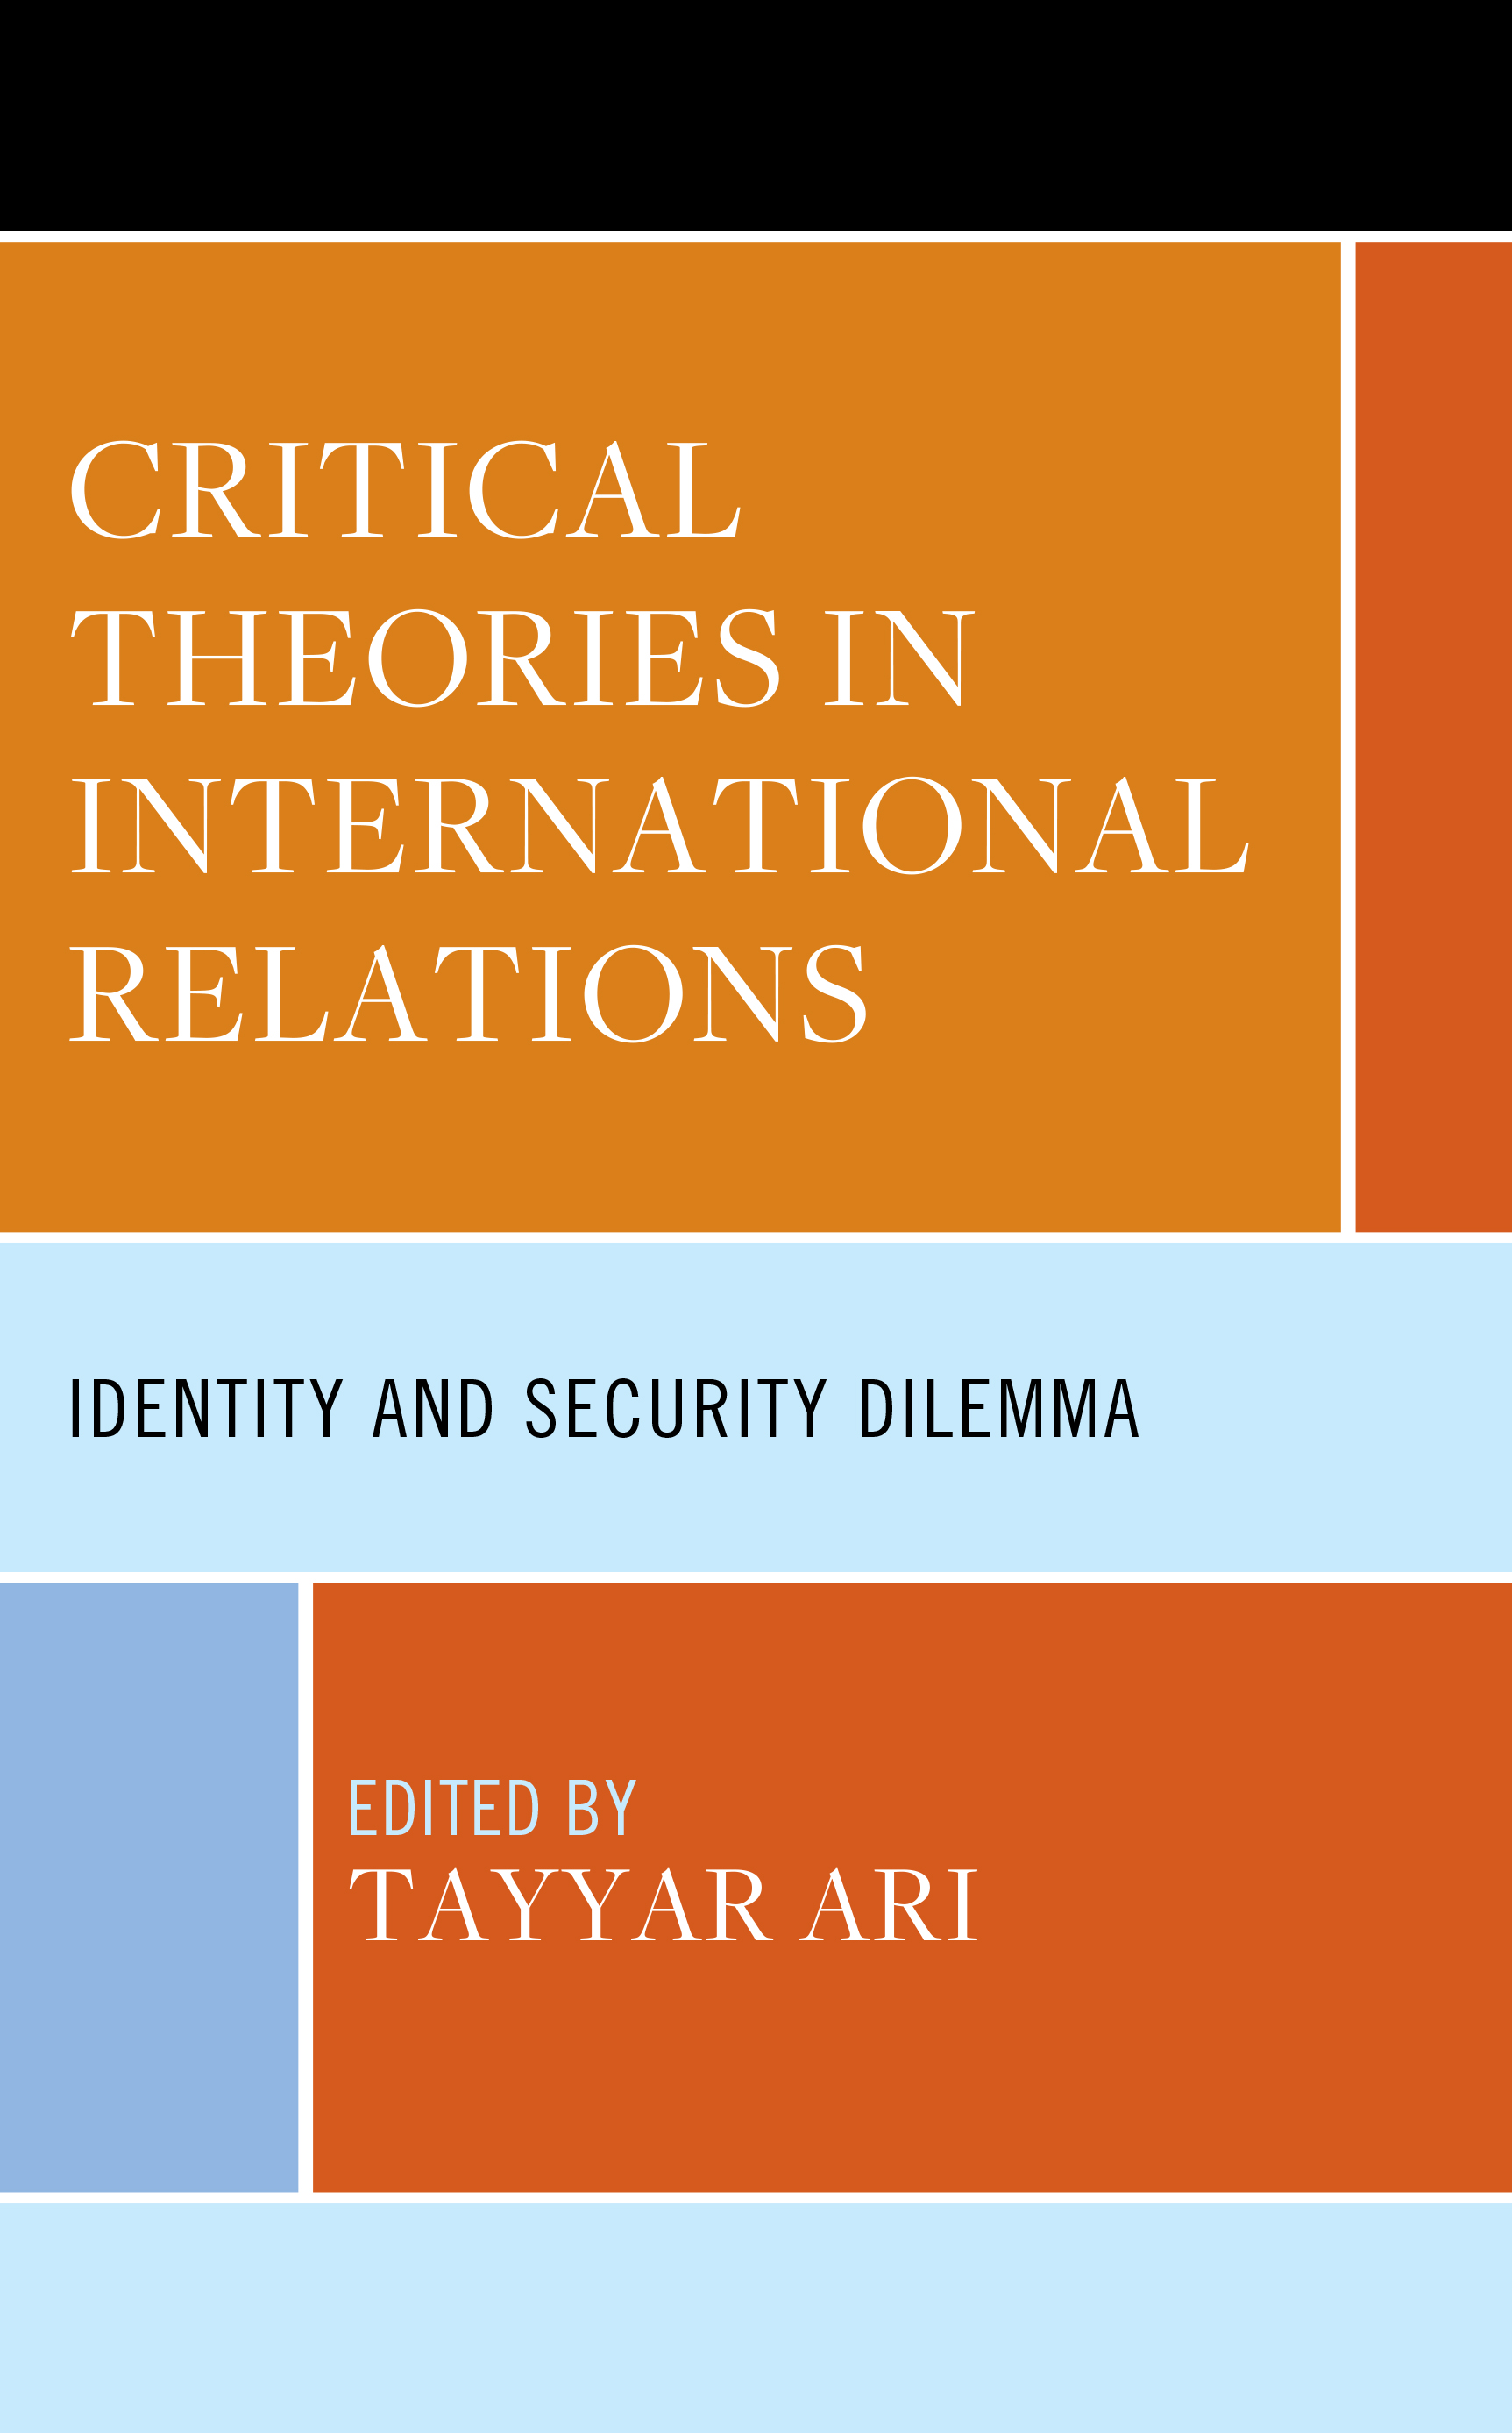 Critical Theories in International Relations: Identity and Security Dilemma